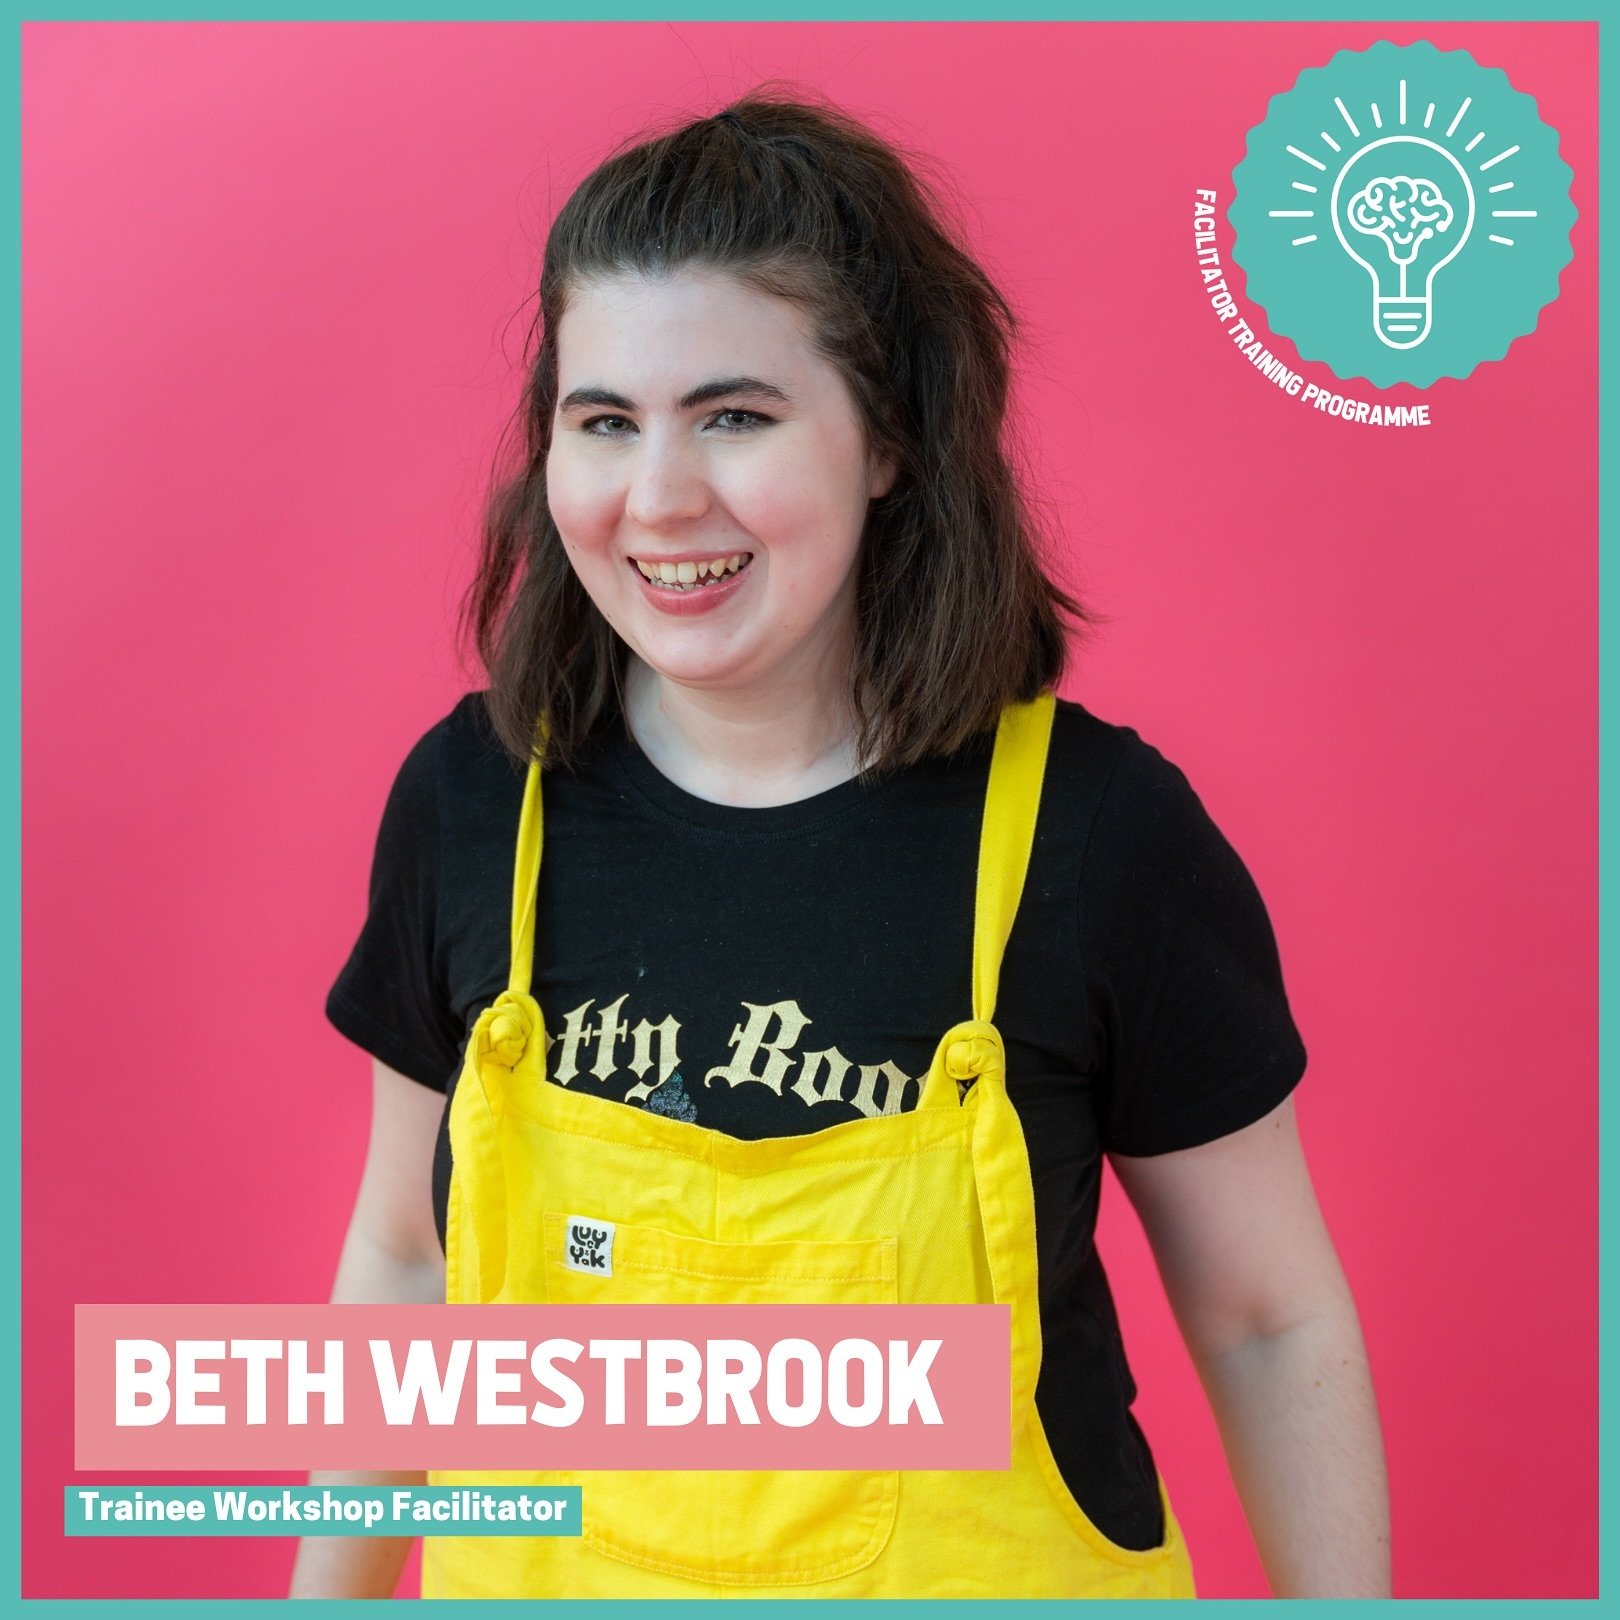 Introducing Beth Westbrook, one of our trainee workshop facilitators!

&ldquo;I&rsquo;m interested in writing and ways of exploring creative access,&nbsp;as well as working with communities.&nbsp;I am drawn to female-led stories with a sense of humou